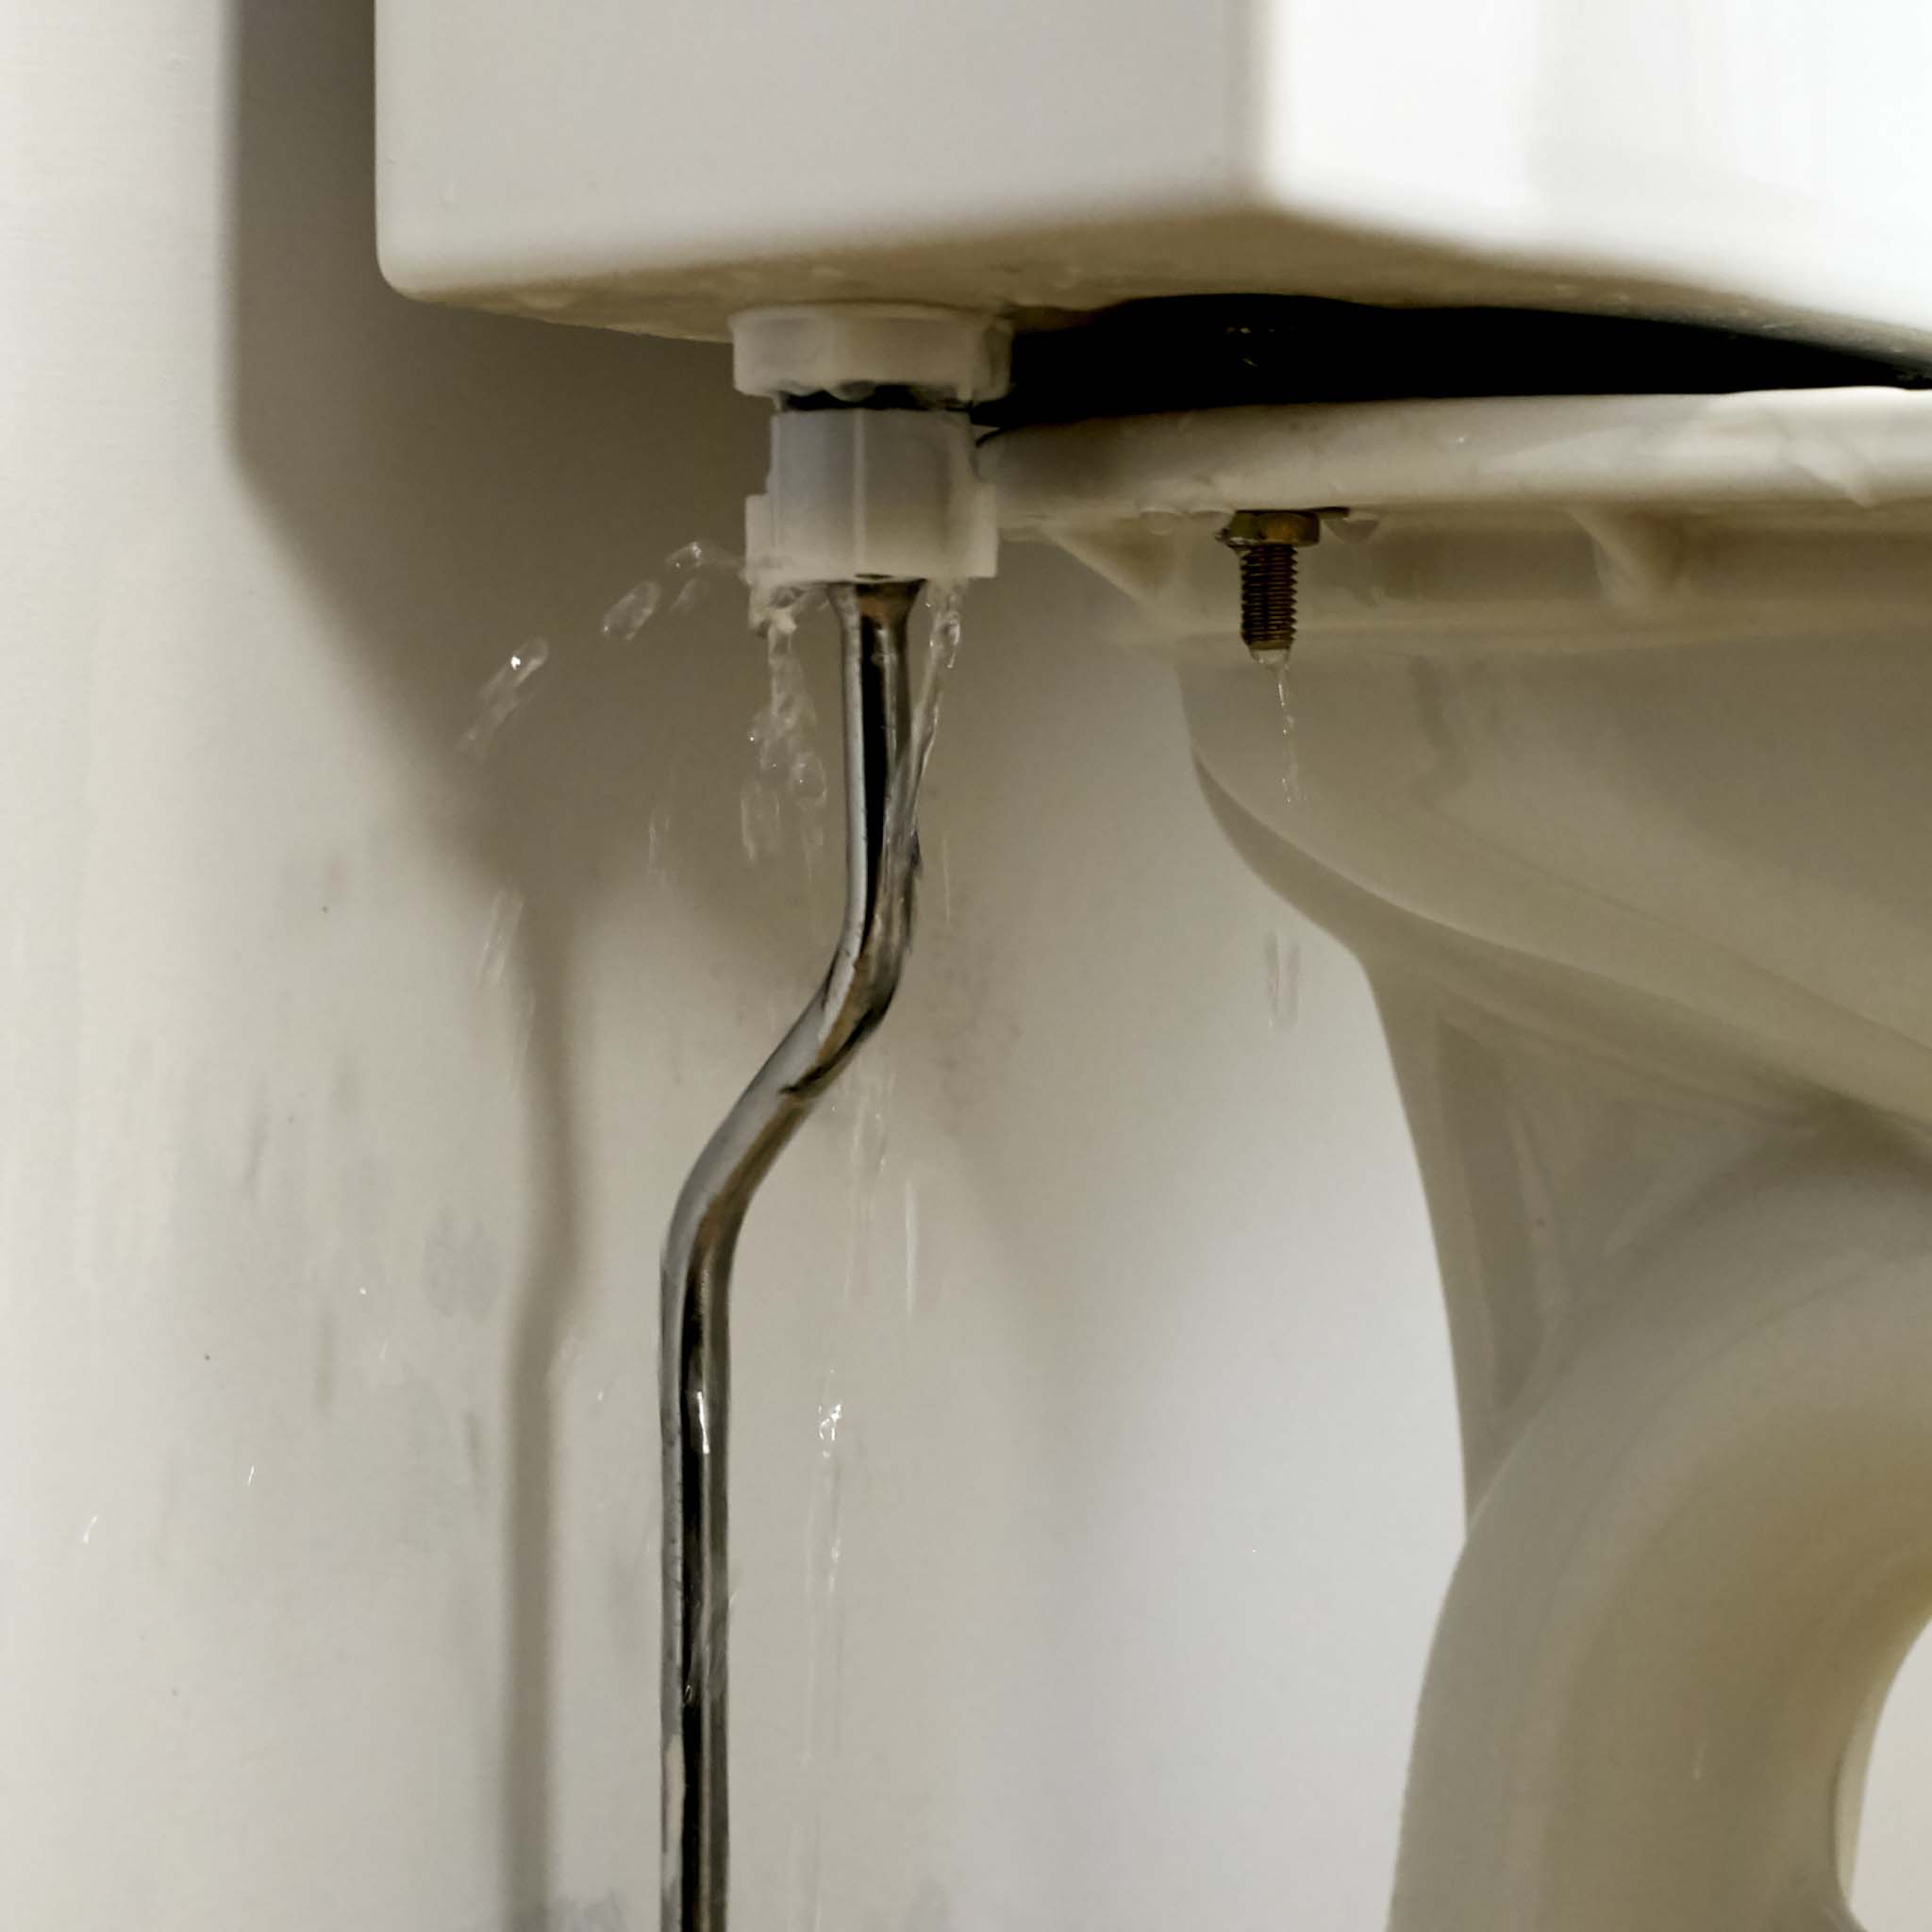 The Insurance Institute for Business & Home Safety reports that plumbing supply system failures is the leading source of residential water loss.